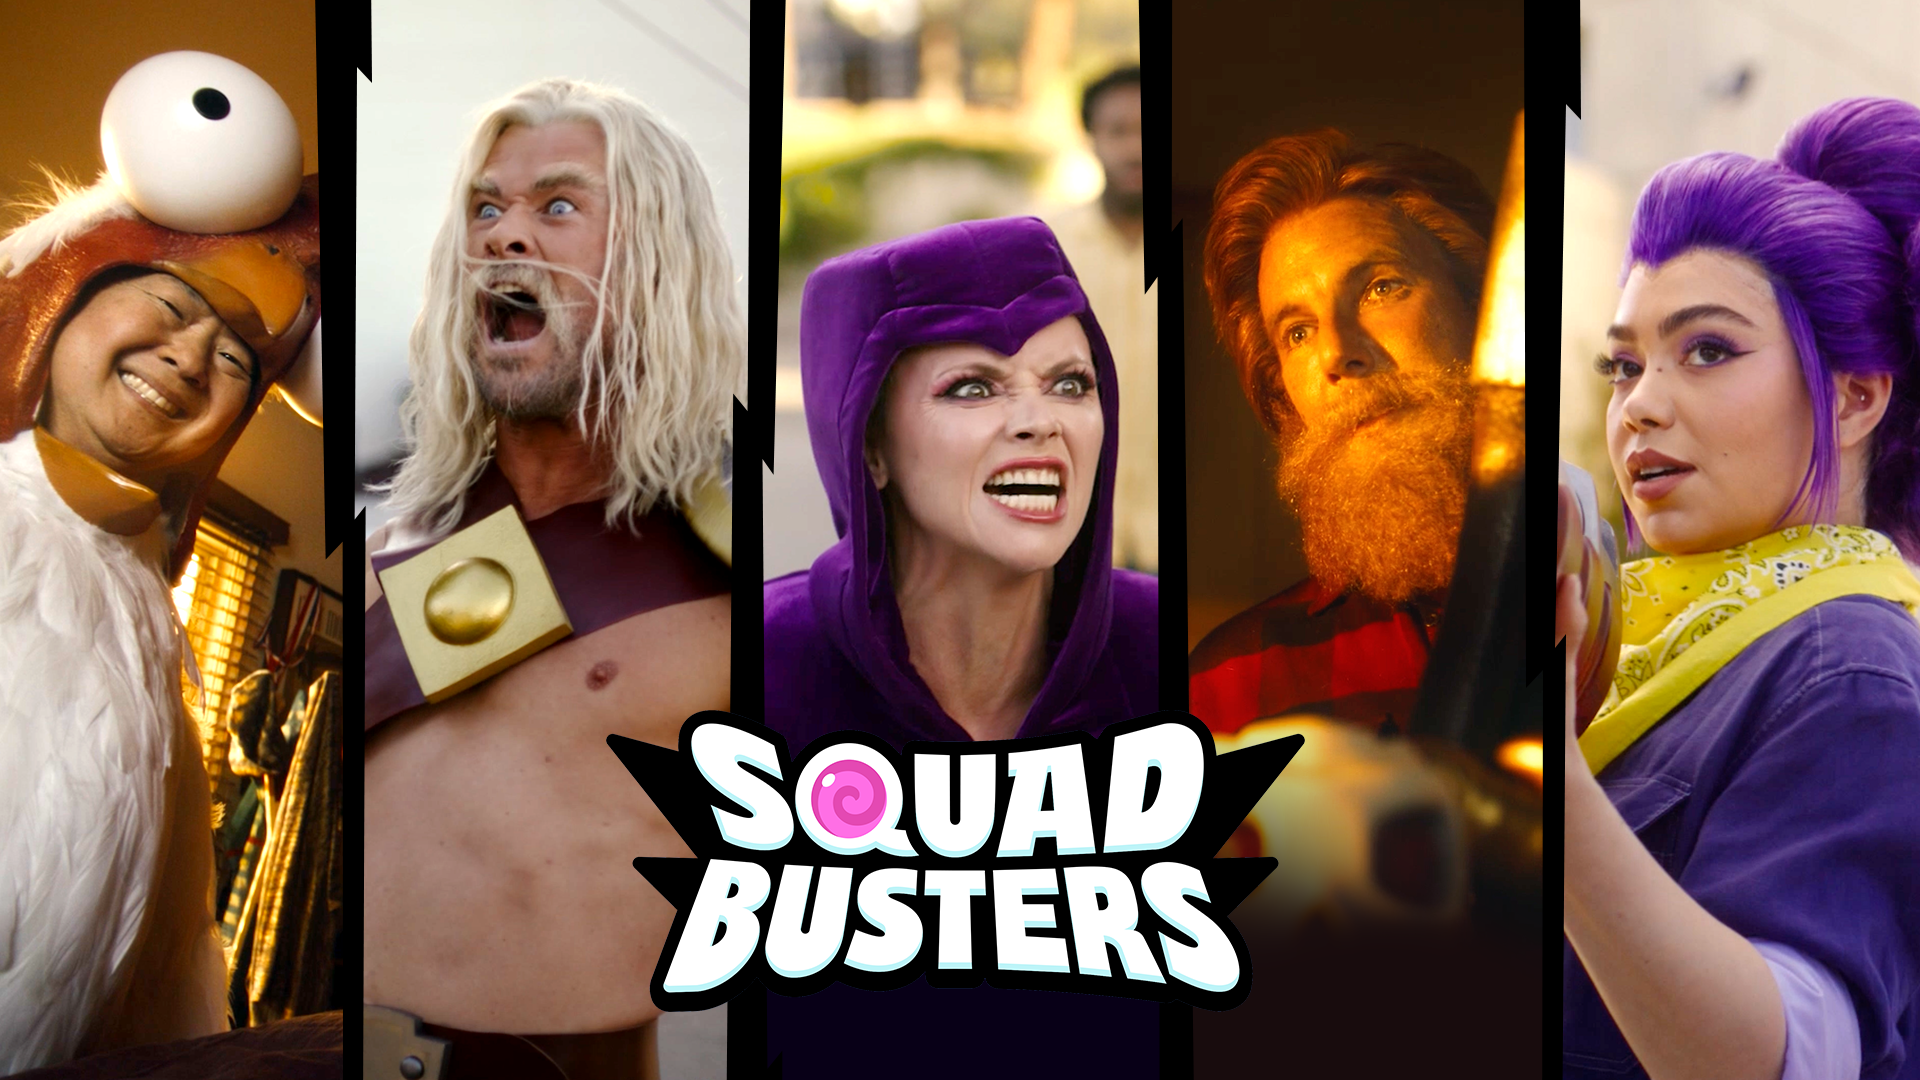 Some of the world’s biggest influencers Squad up with Supercell for global game launch!